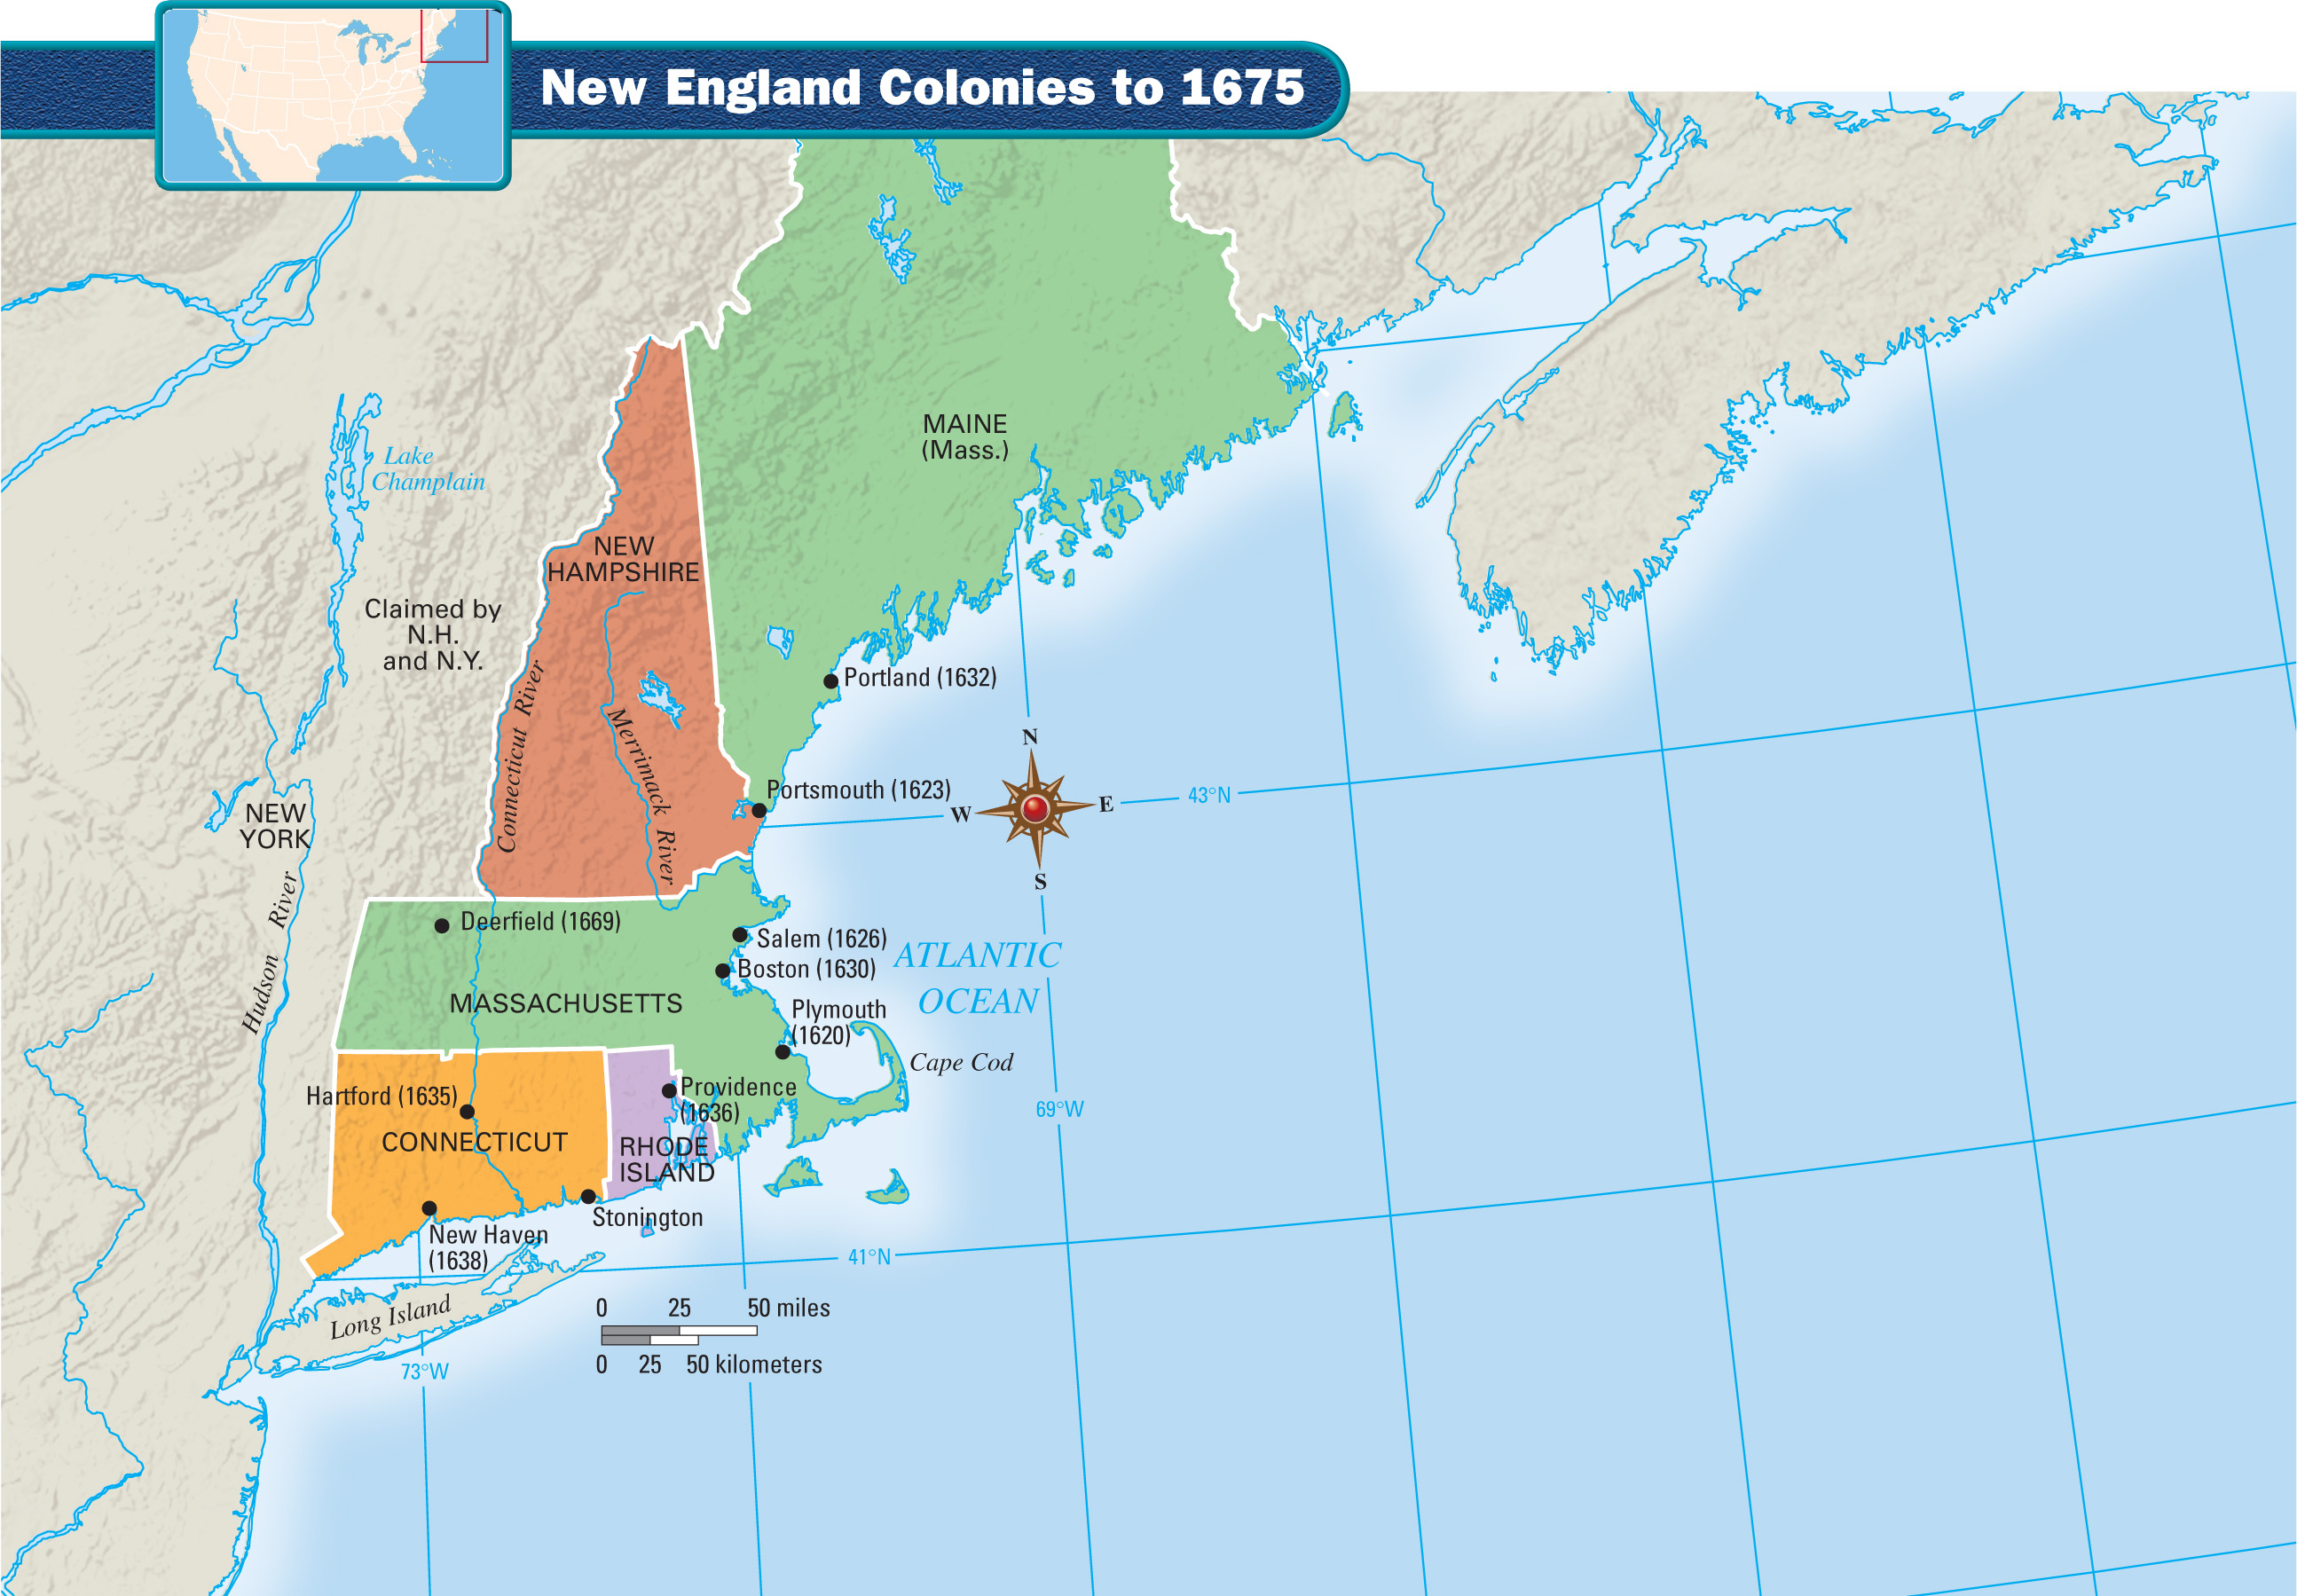 A map shows the New England Colonies to 1675. Maine is part of Massachusetts, and Vermont is claimed by New York and New Hampshire.